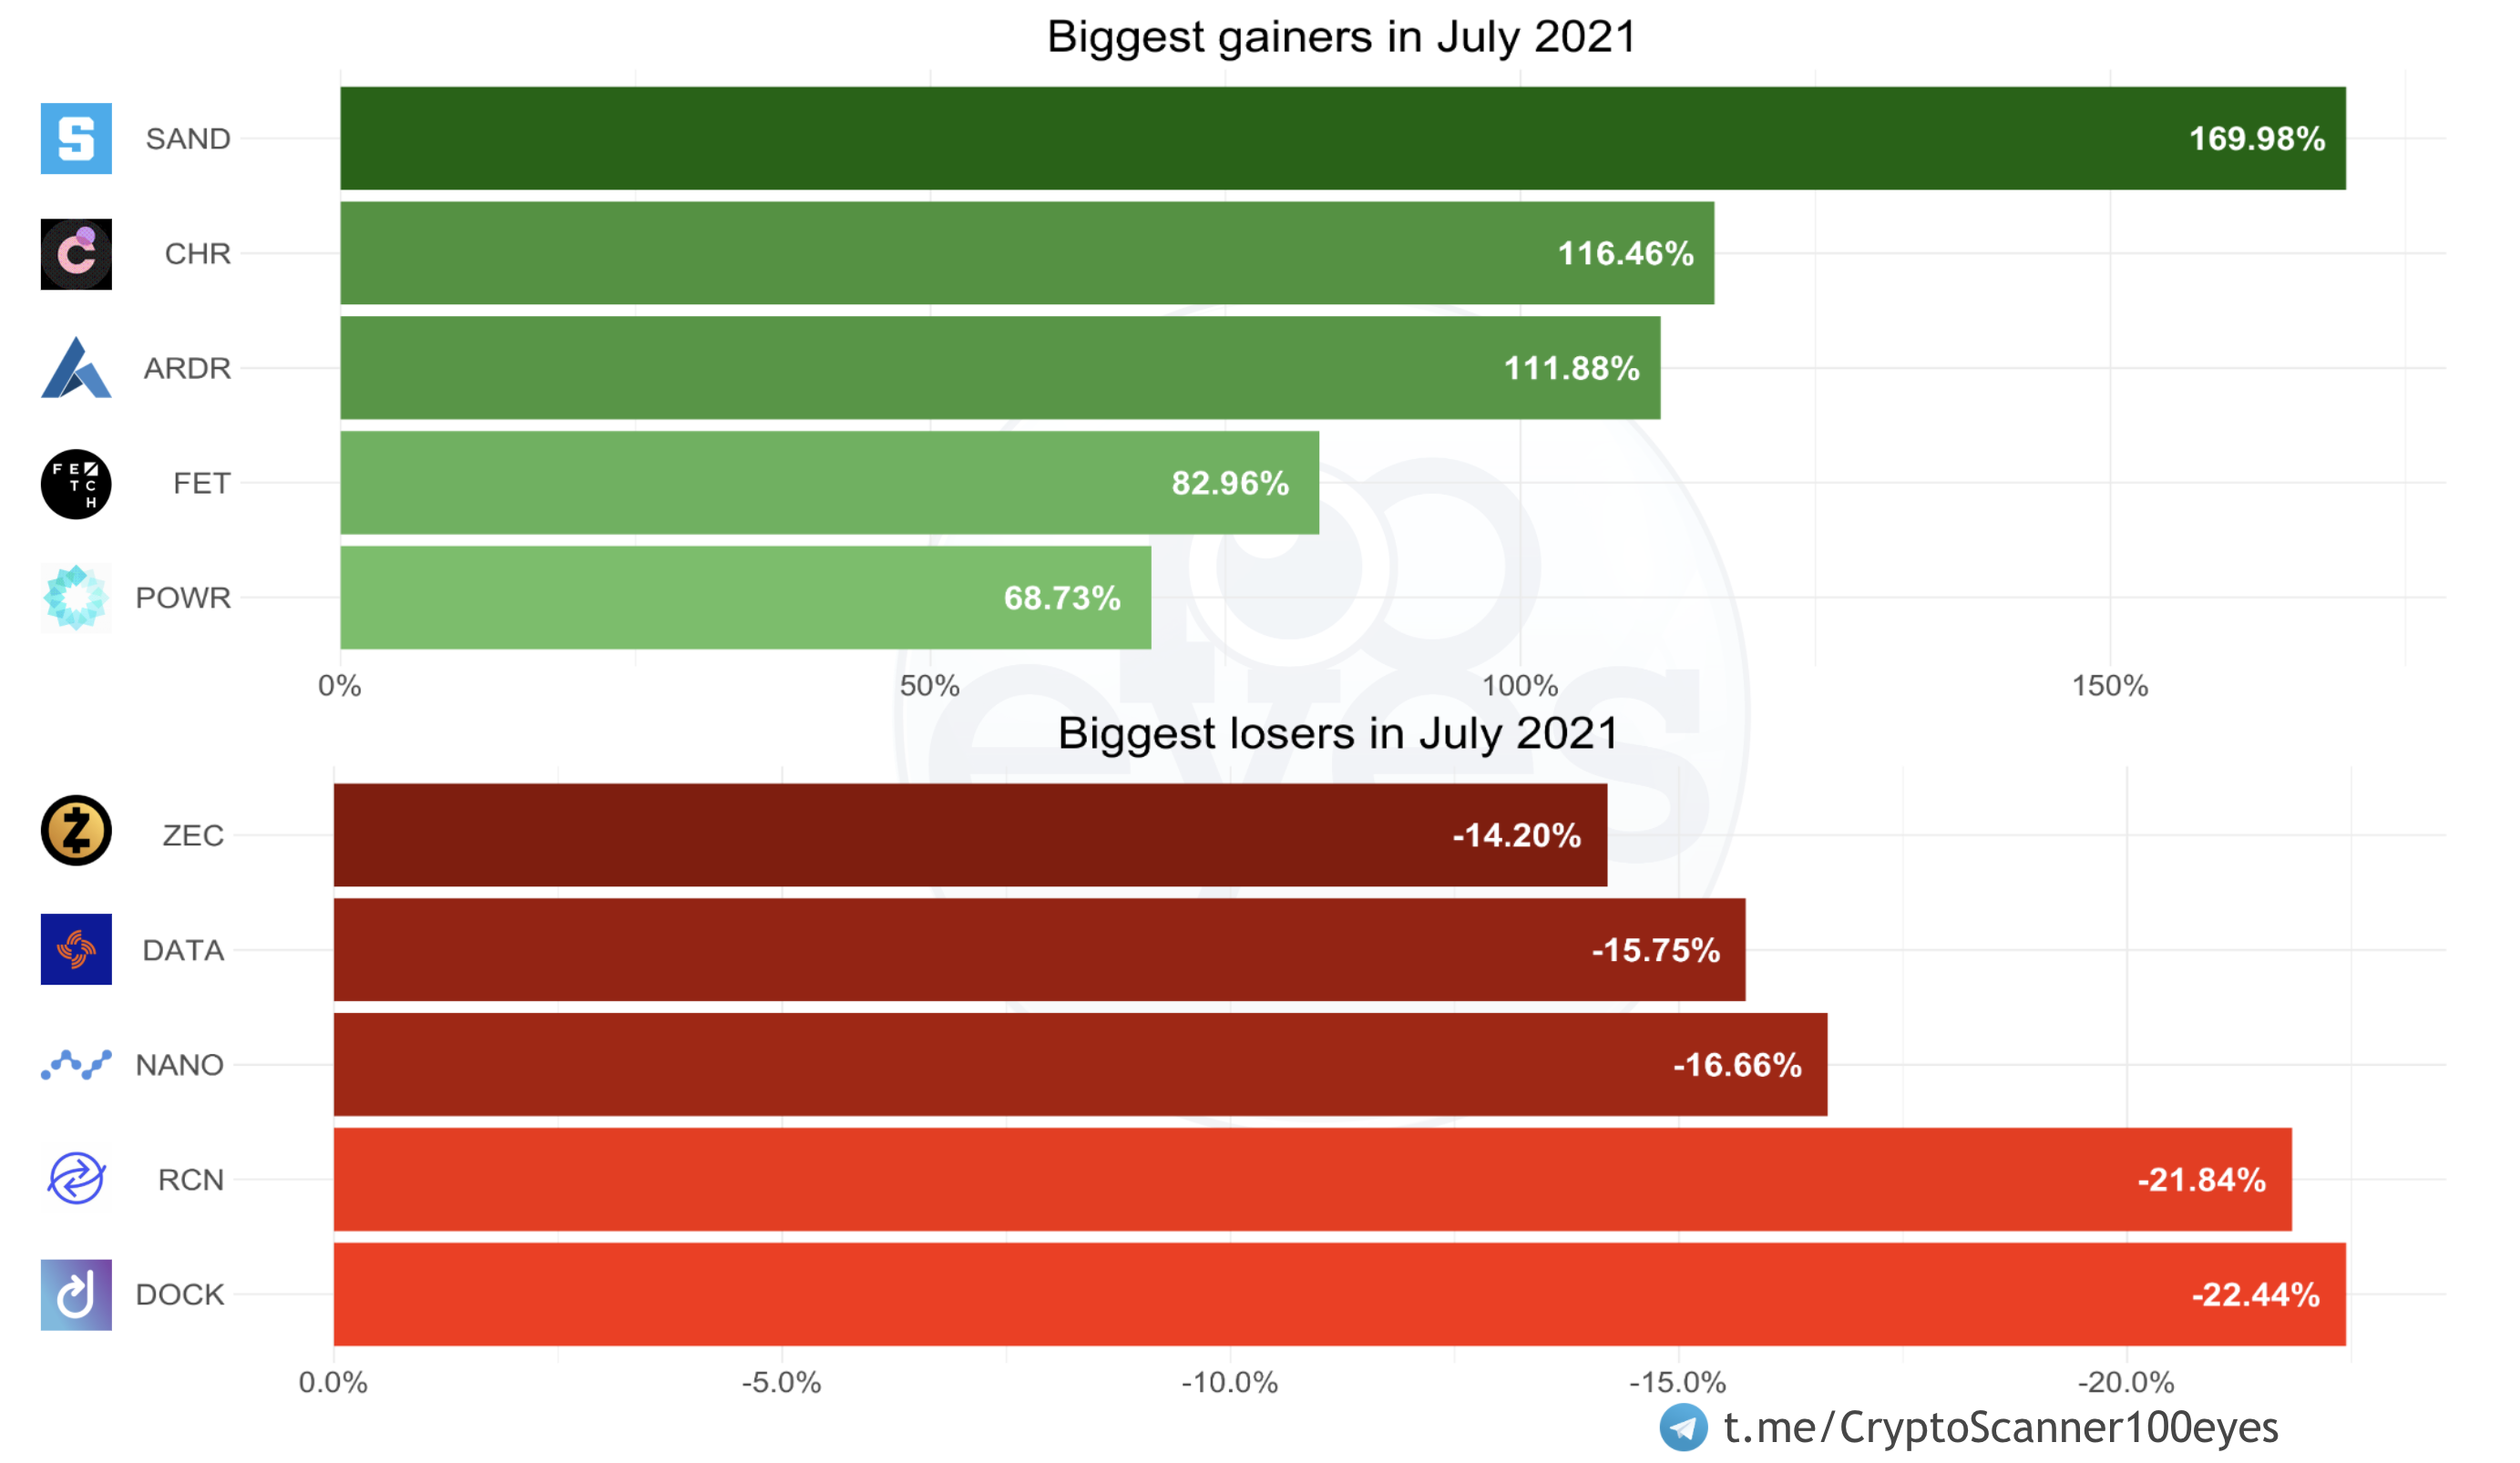 Showing the top gainers and losers of altcoin expressed in their BTC value